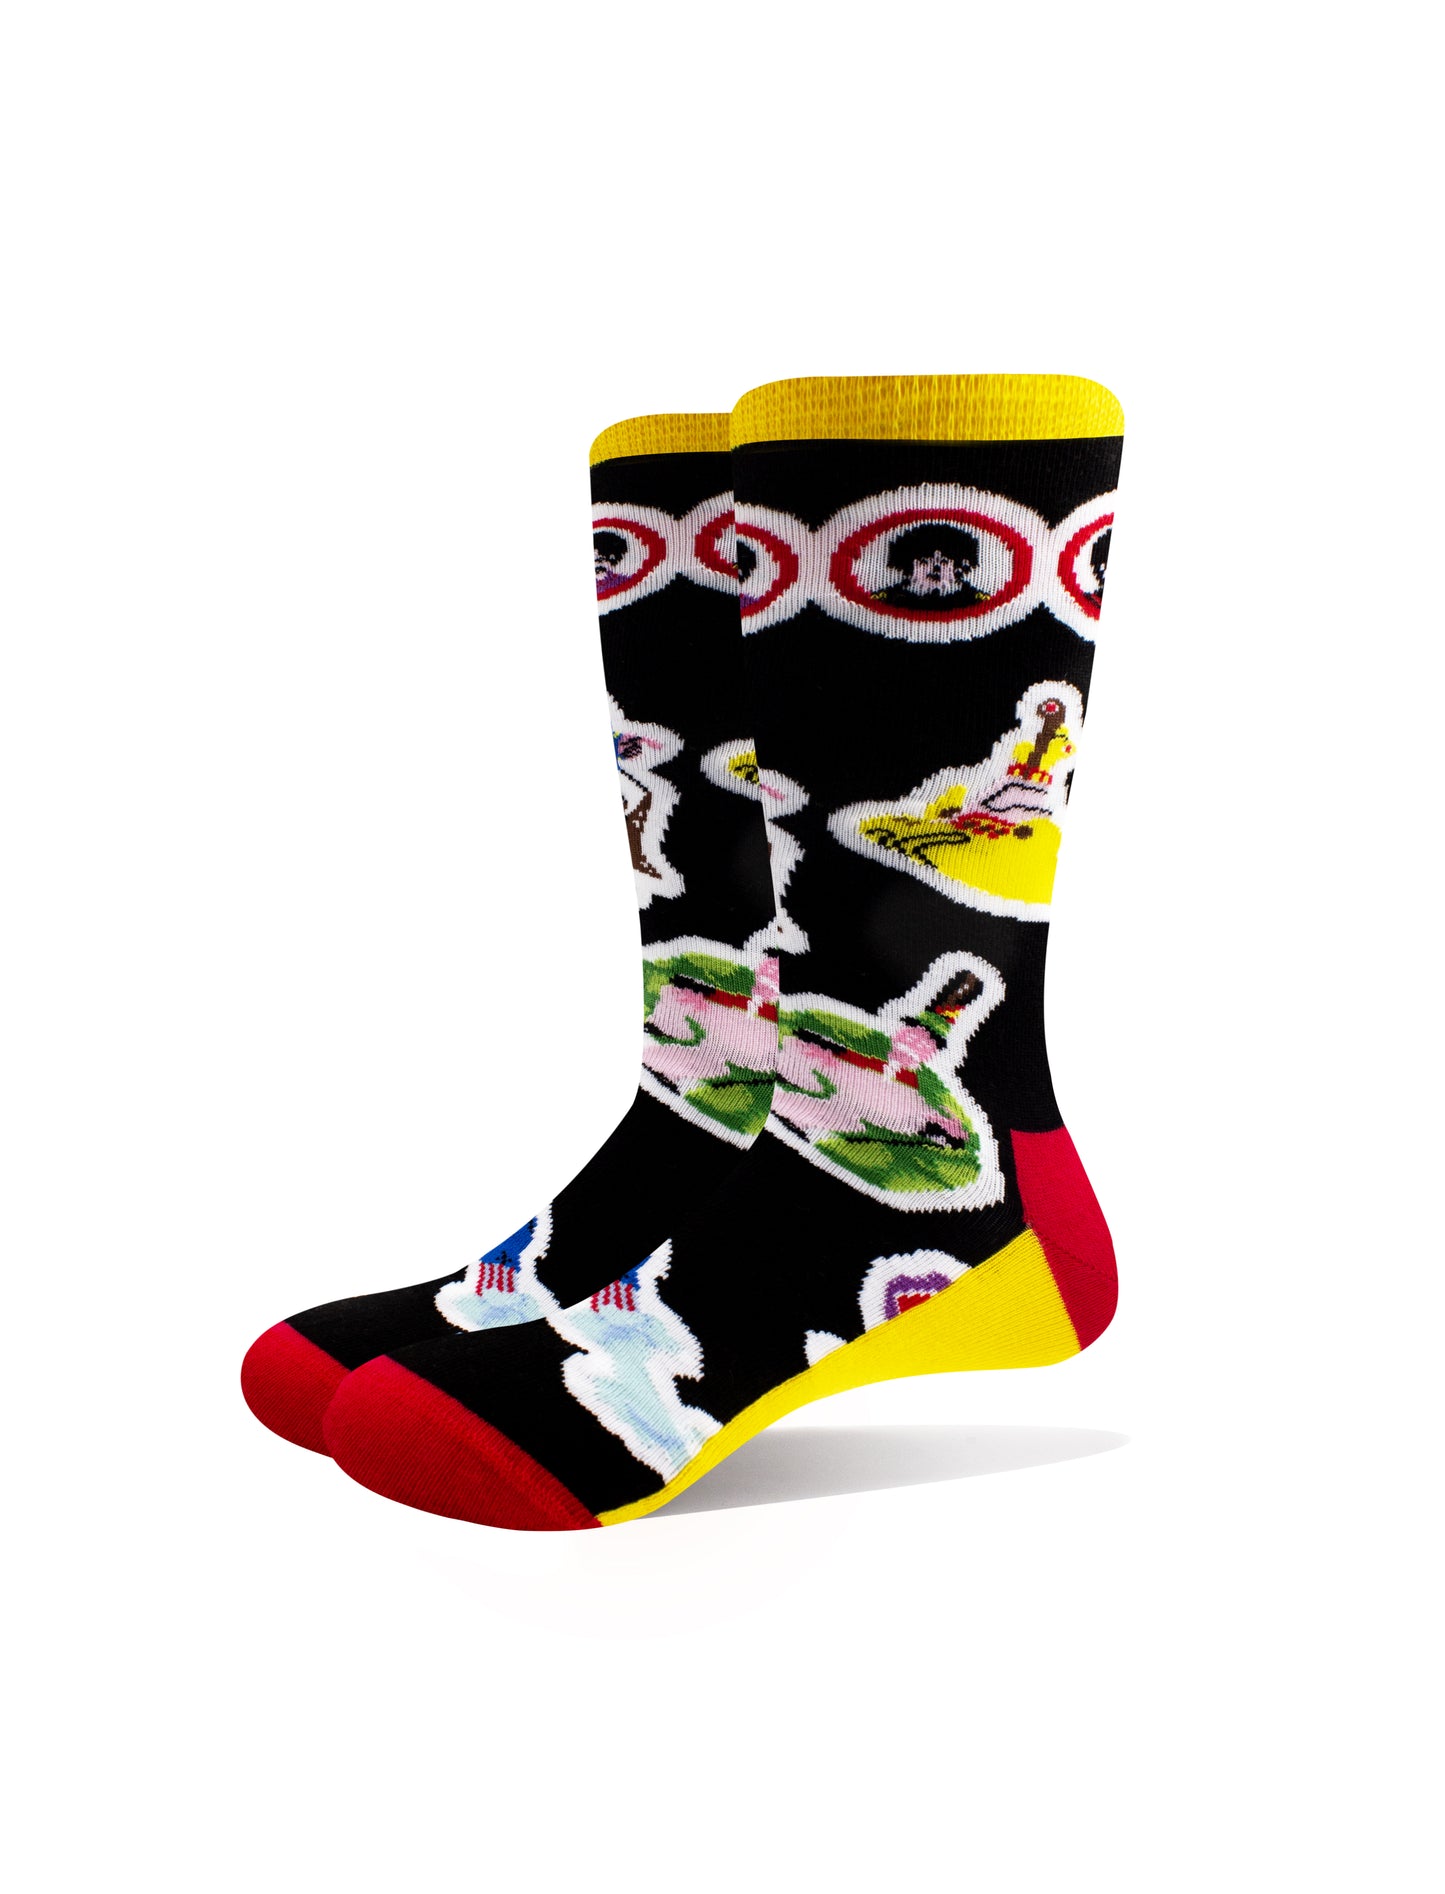 The Beatles Yellow Submarine Portholes and Characters Socks